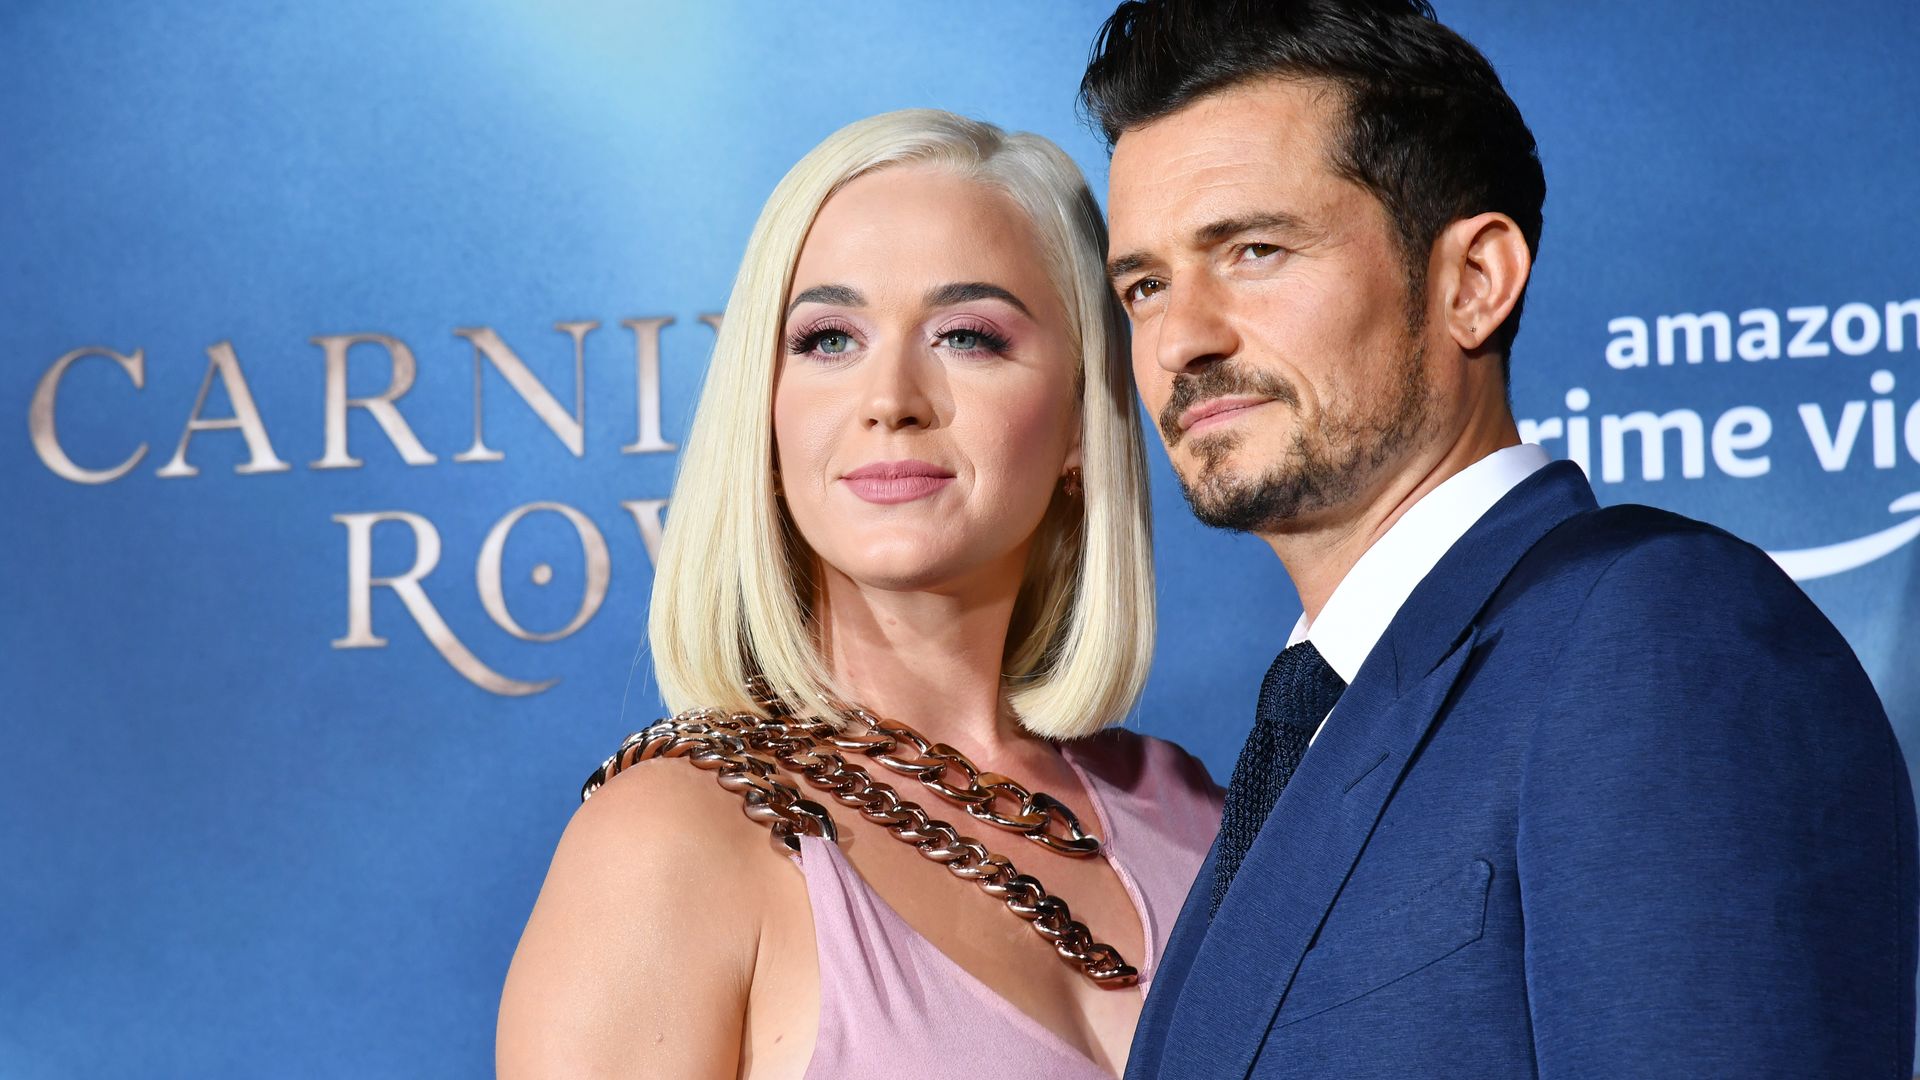 Orlando Bloom supported by Katy Perry as he mourns former Lord of the Rings co-star's passing: 'Never broken'